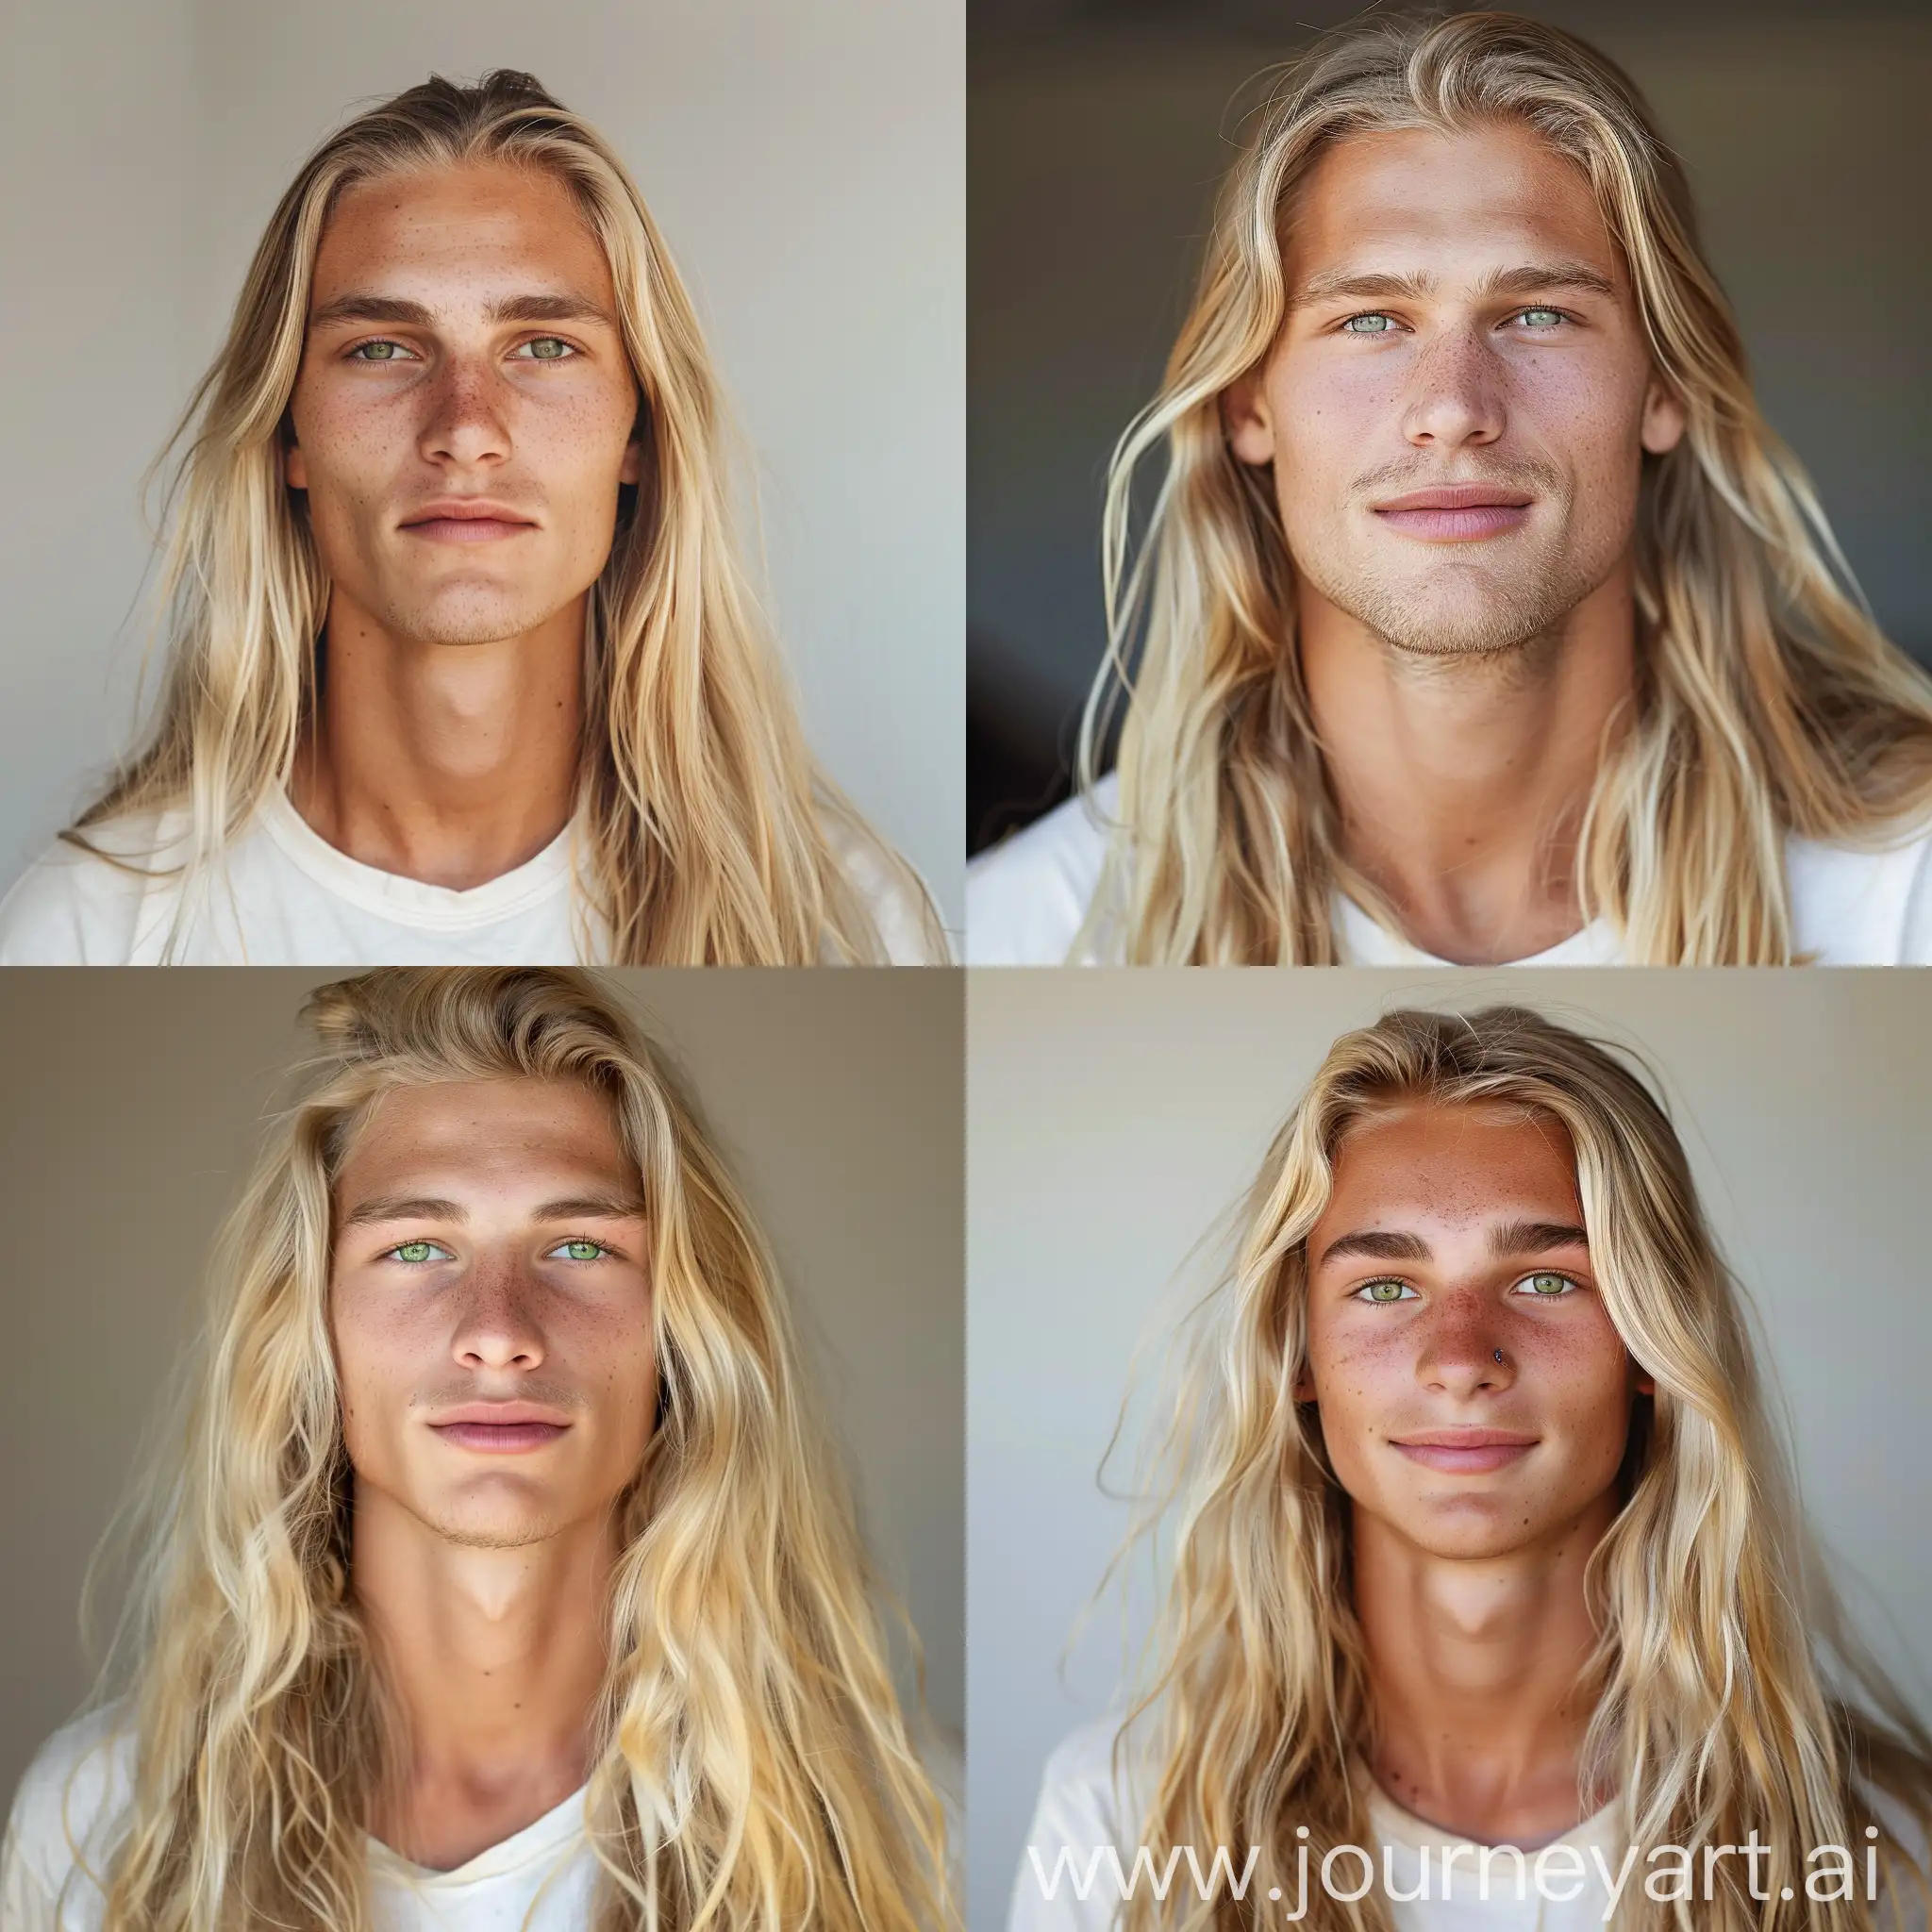 Gentle-Smiling-Blond-Man-with-Long-Hair-and-Green-Eyes